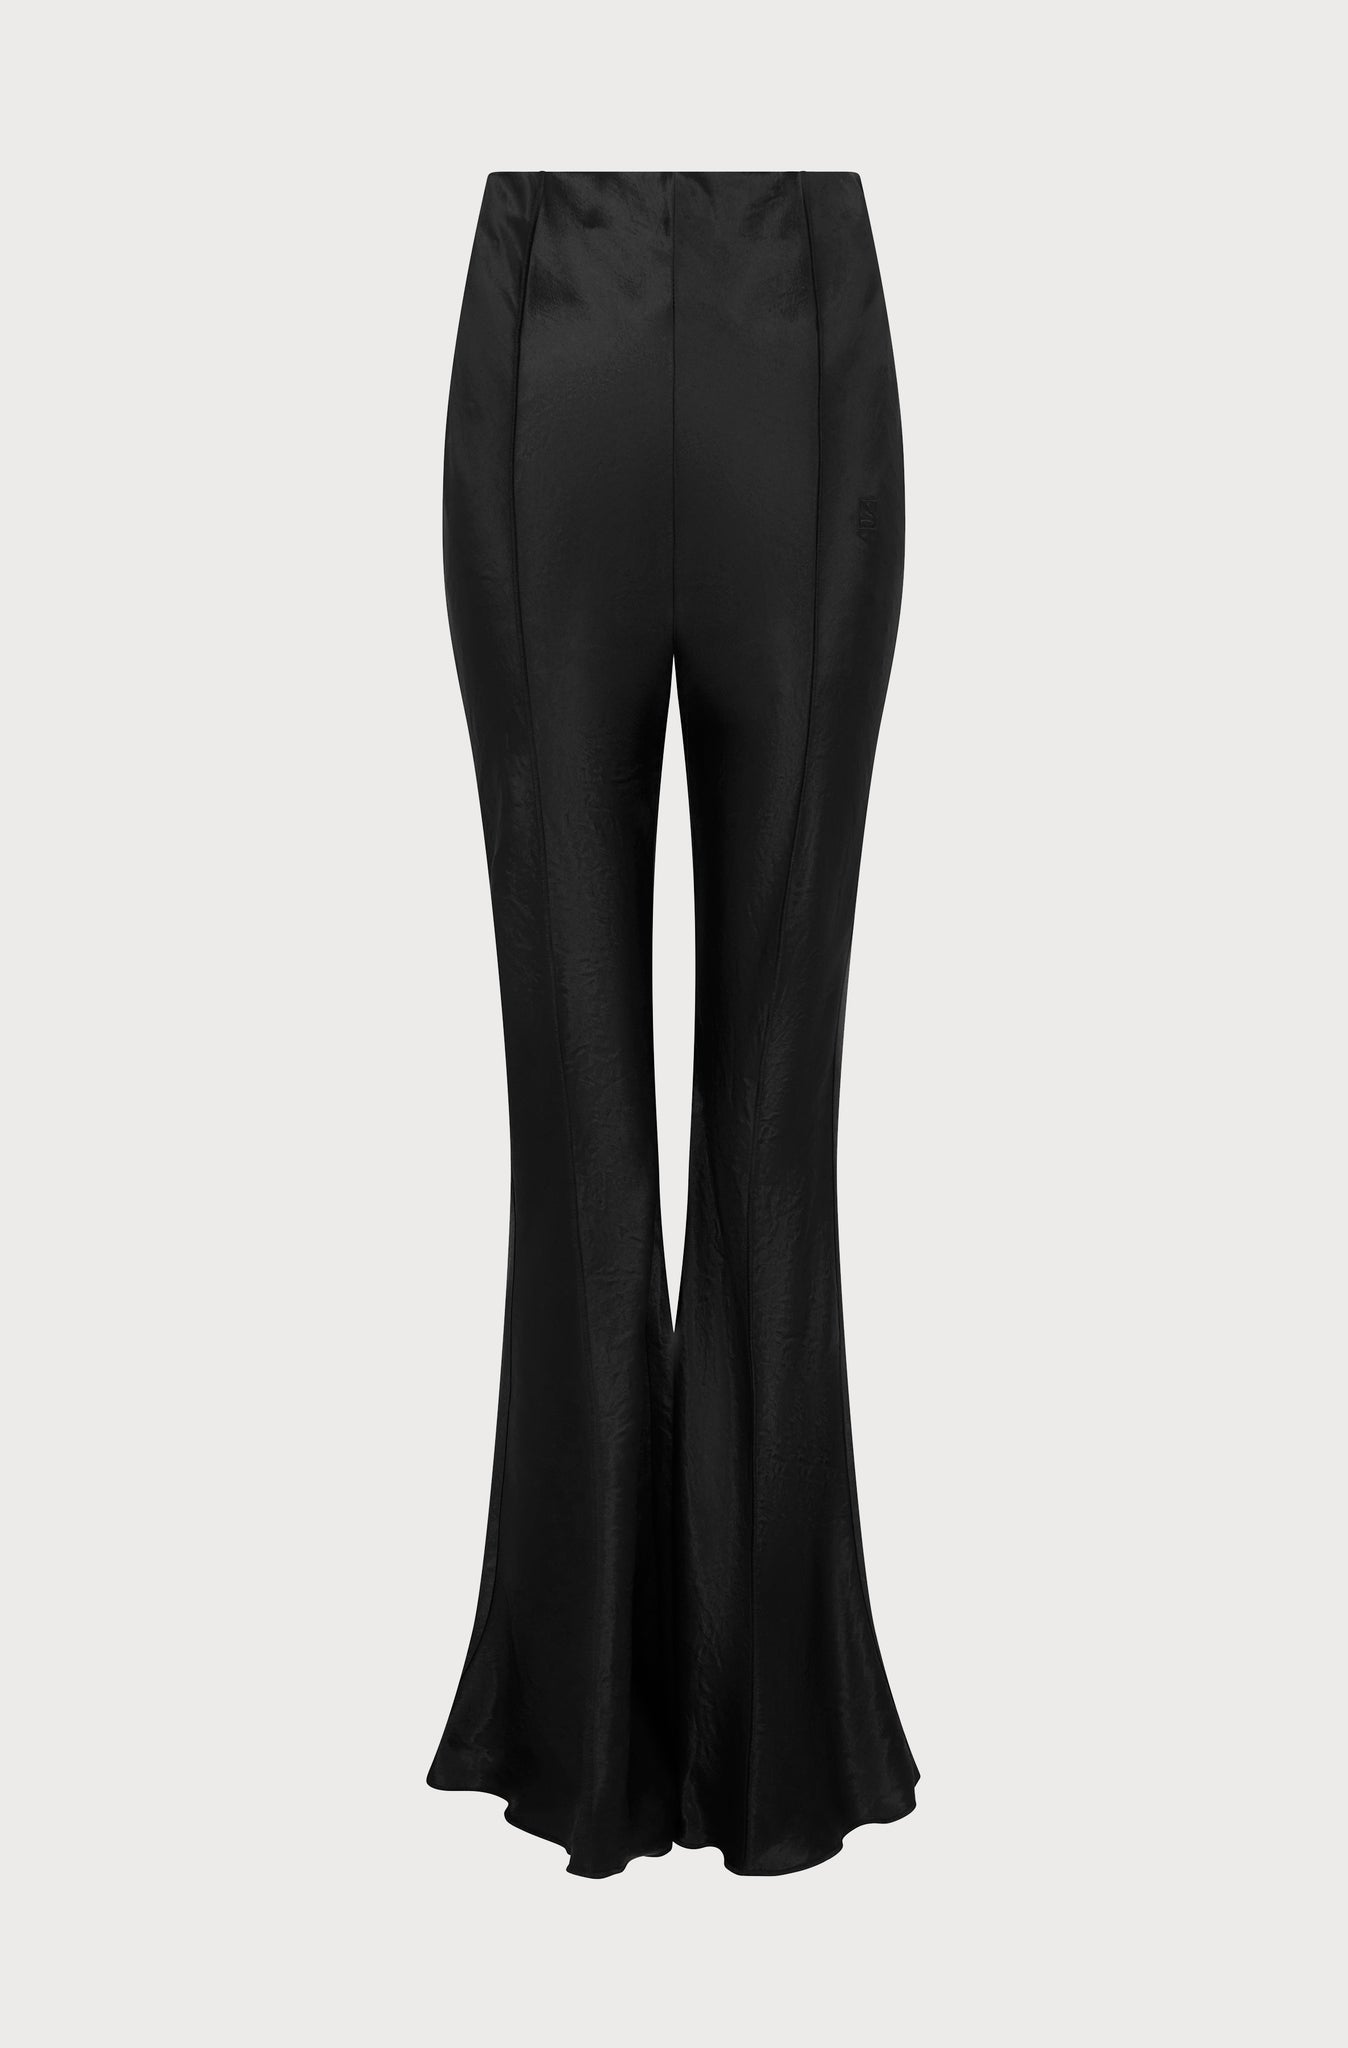 GALVAN Wide & Flare Pants sale - discounted price | FASHIOLA.in